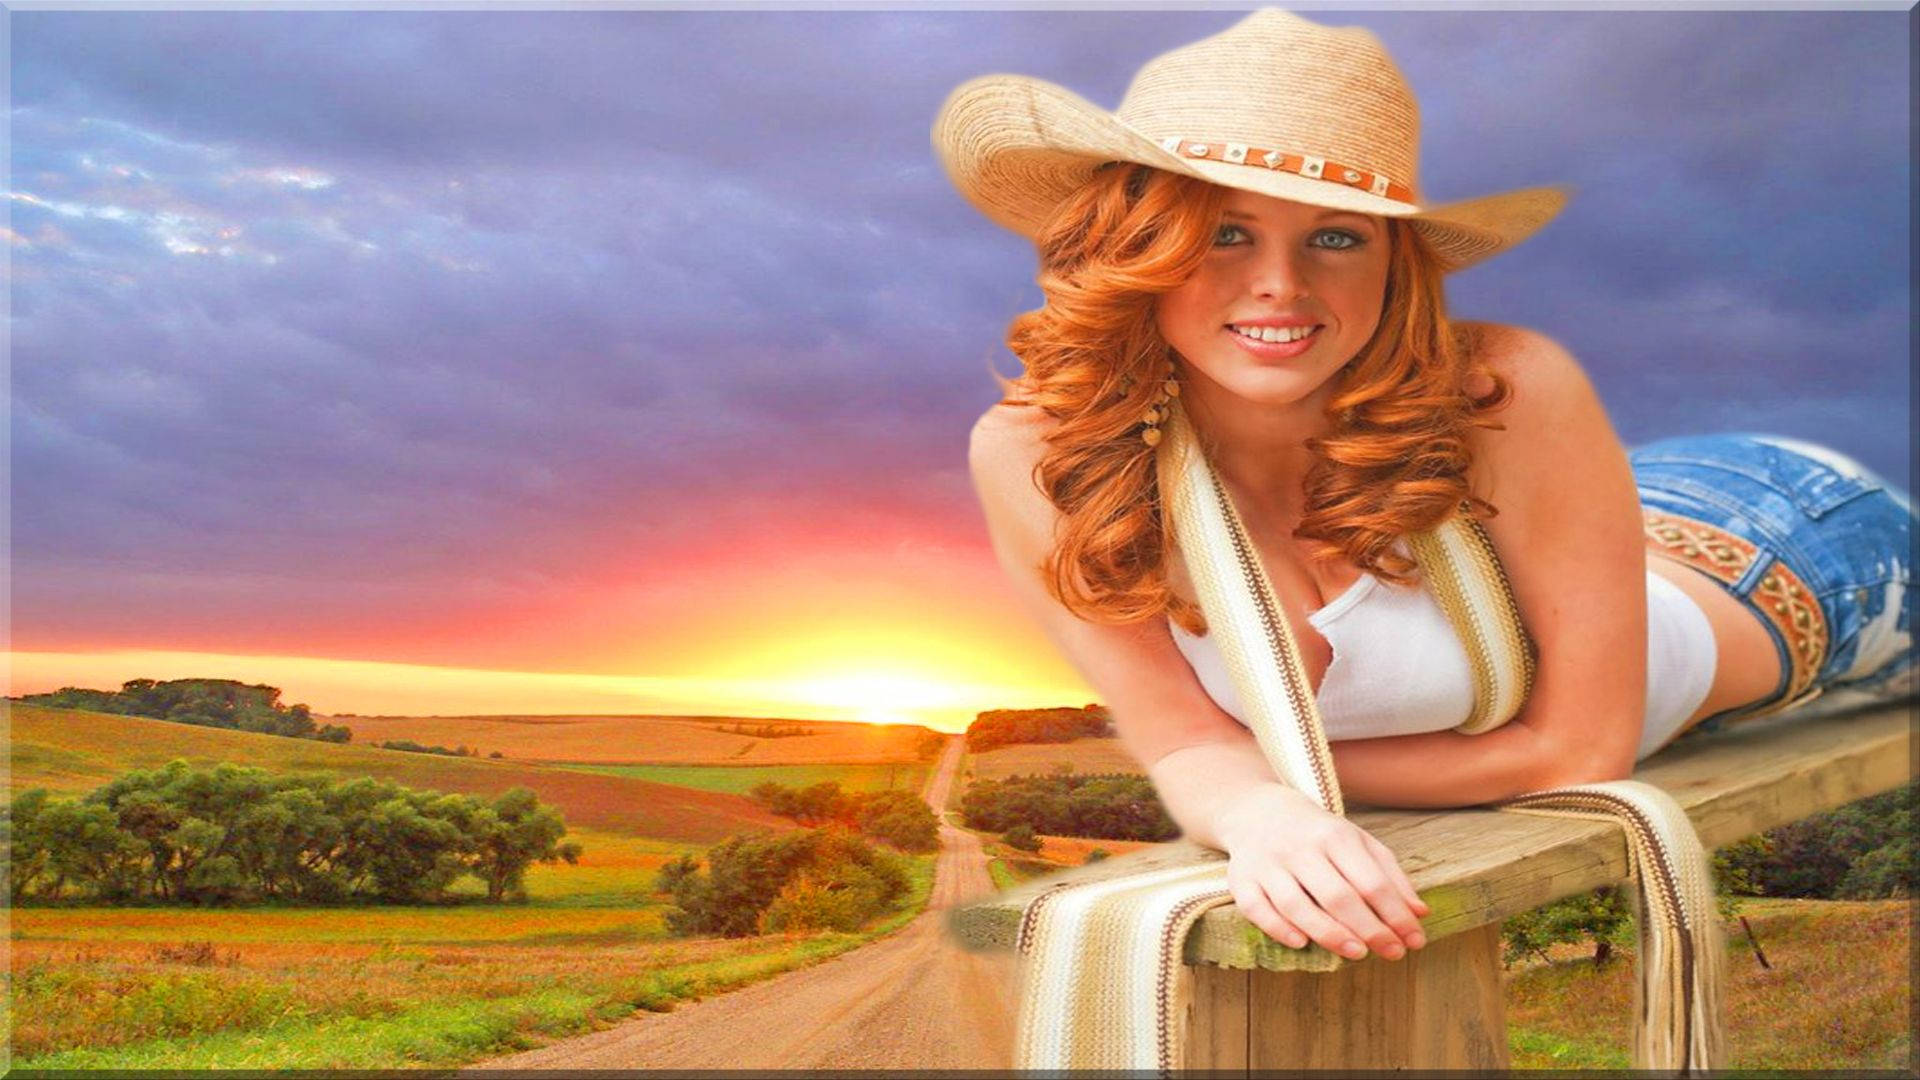 Cowgirl On A Bench Wallpaper